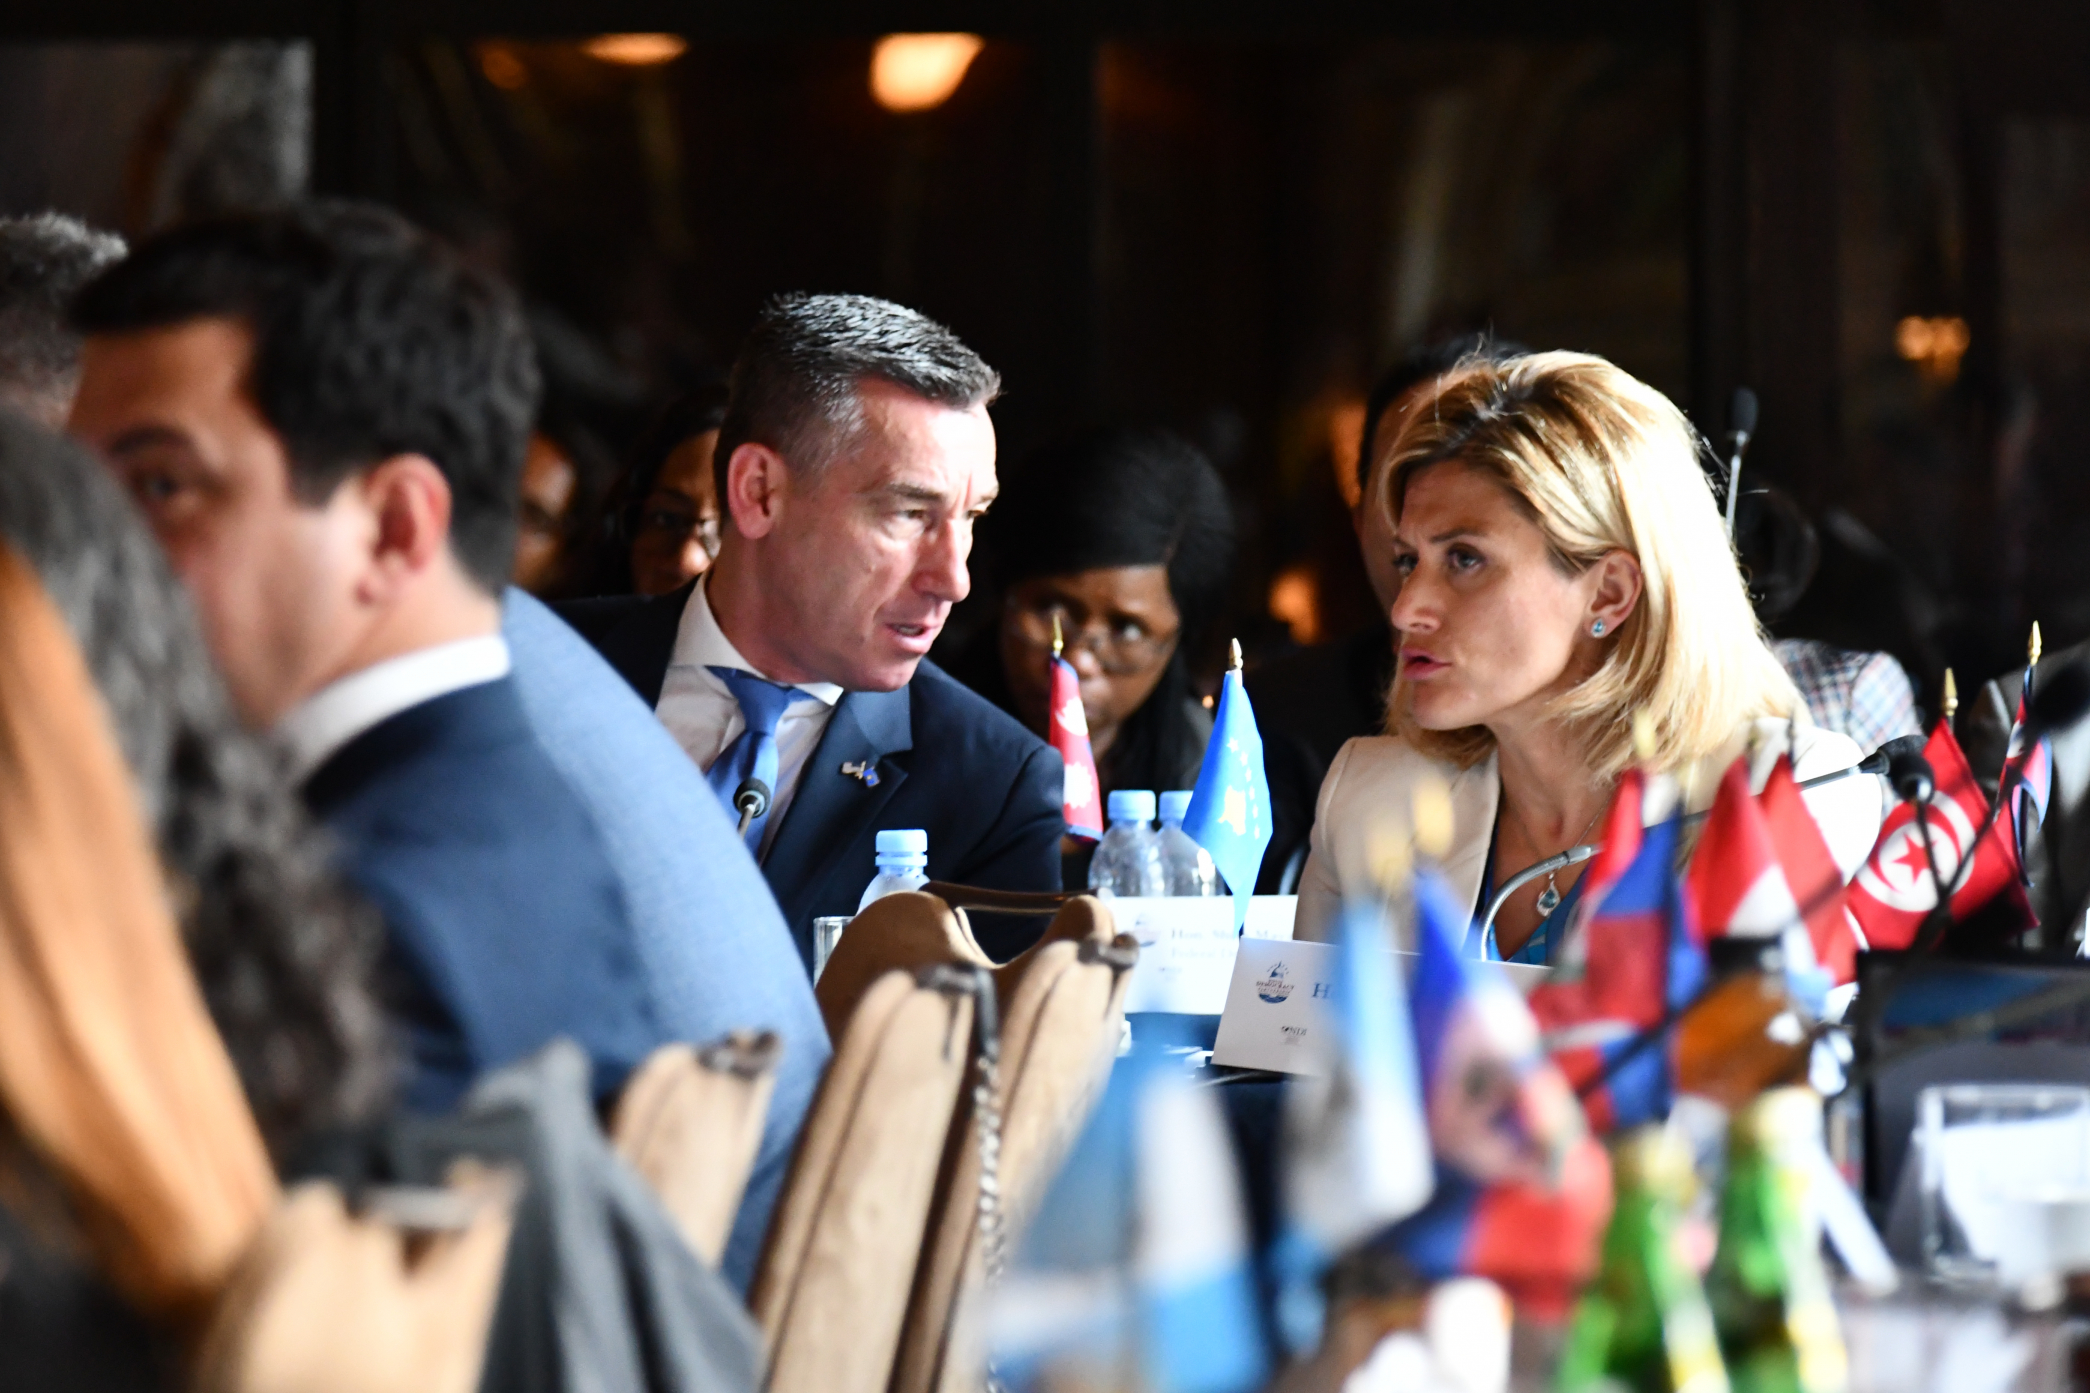 Hon. Kadri Veseli, Speaker of the Assembly of the Republic of Kosovo (left), speaks to Hon. Mimoza Kusari-Lila, Member of the Assembly of the Republic of Kosovo (right) during a panel discussion on combating polarization and enhancing cross-party communic